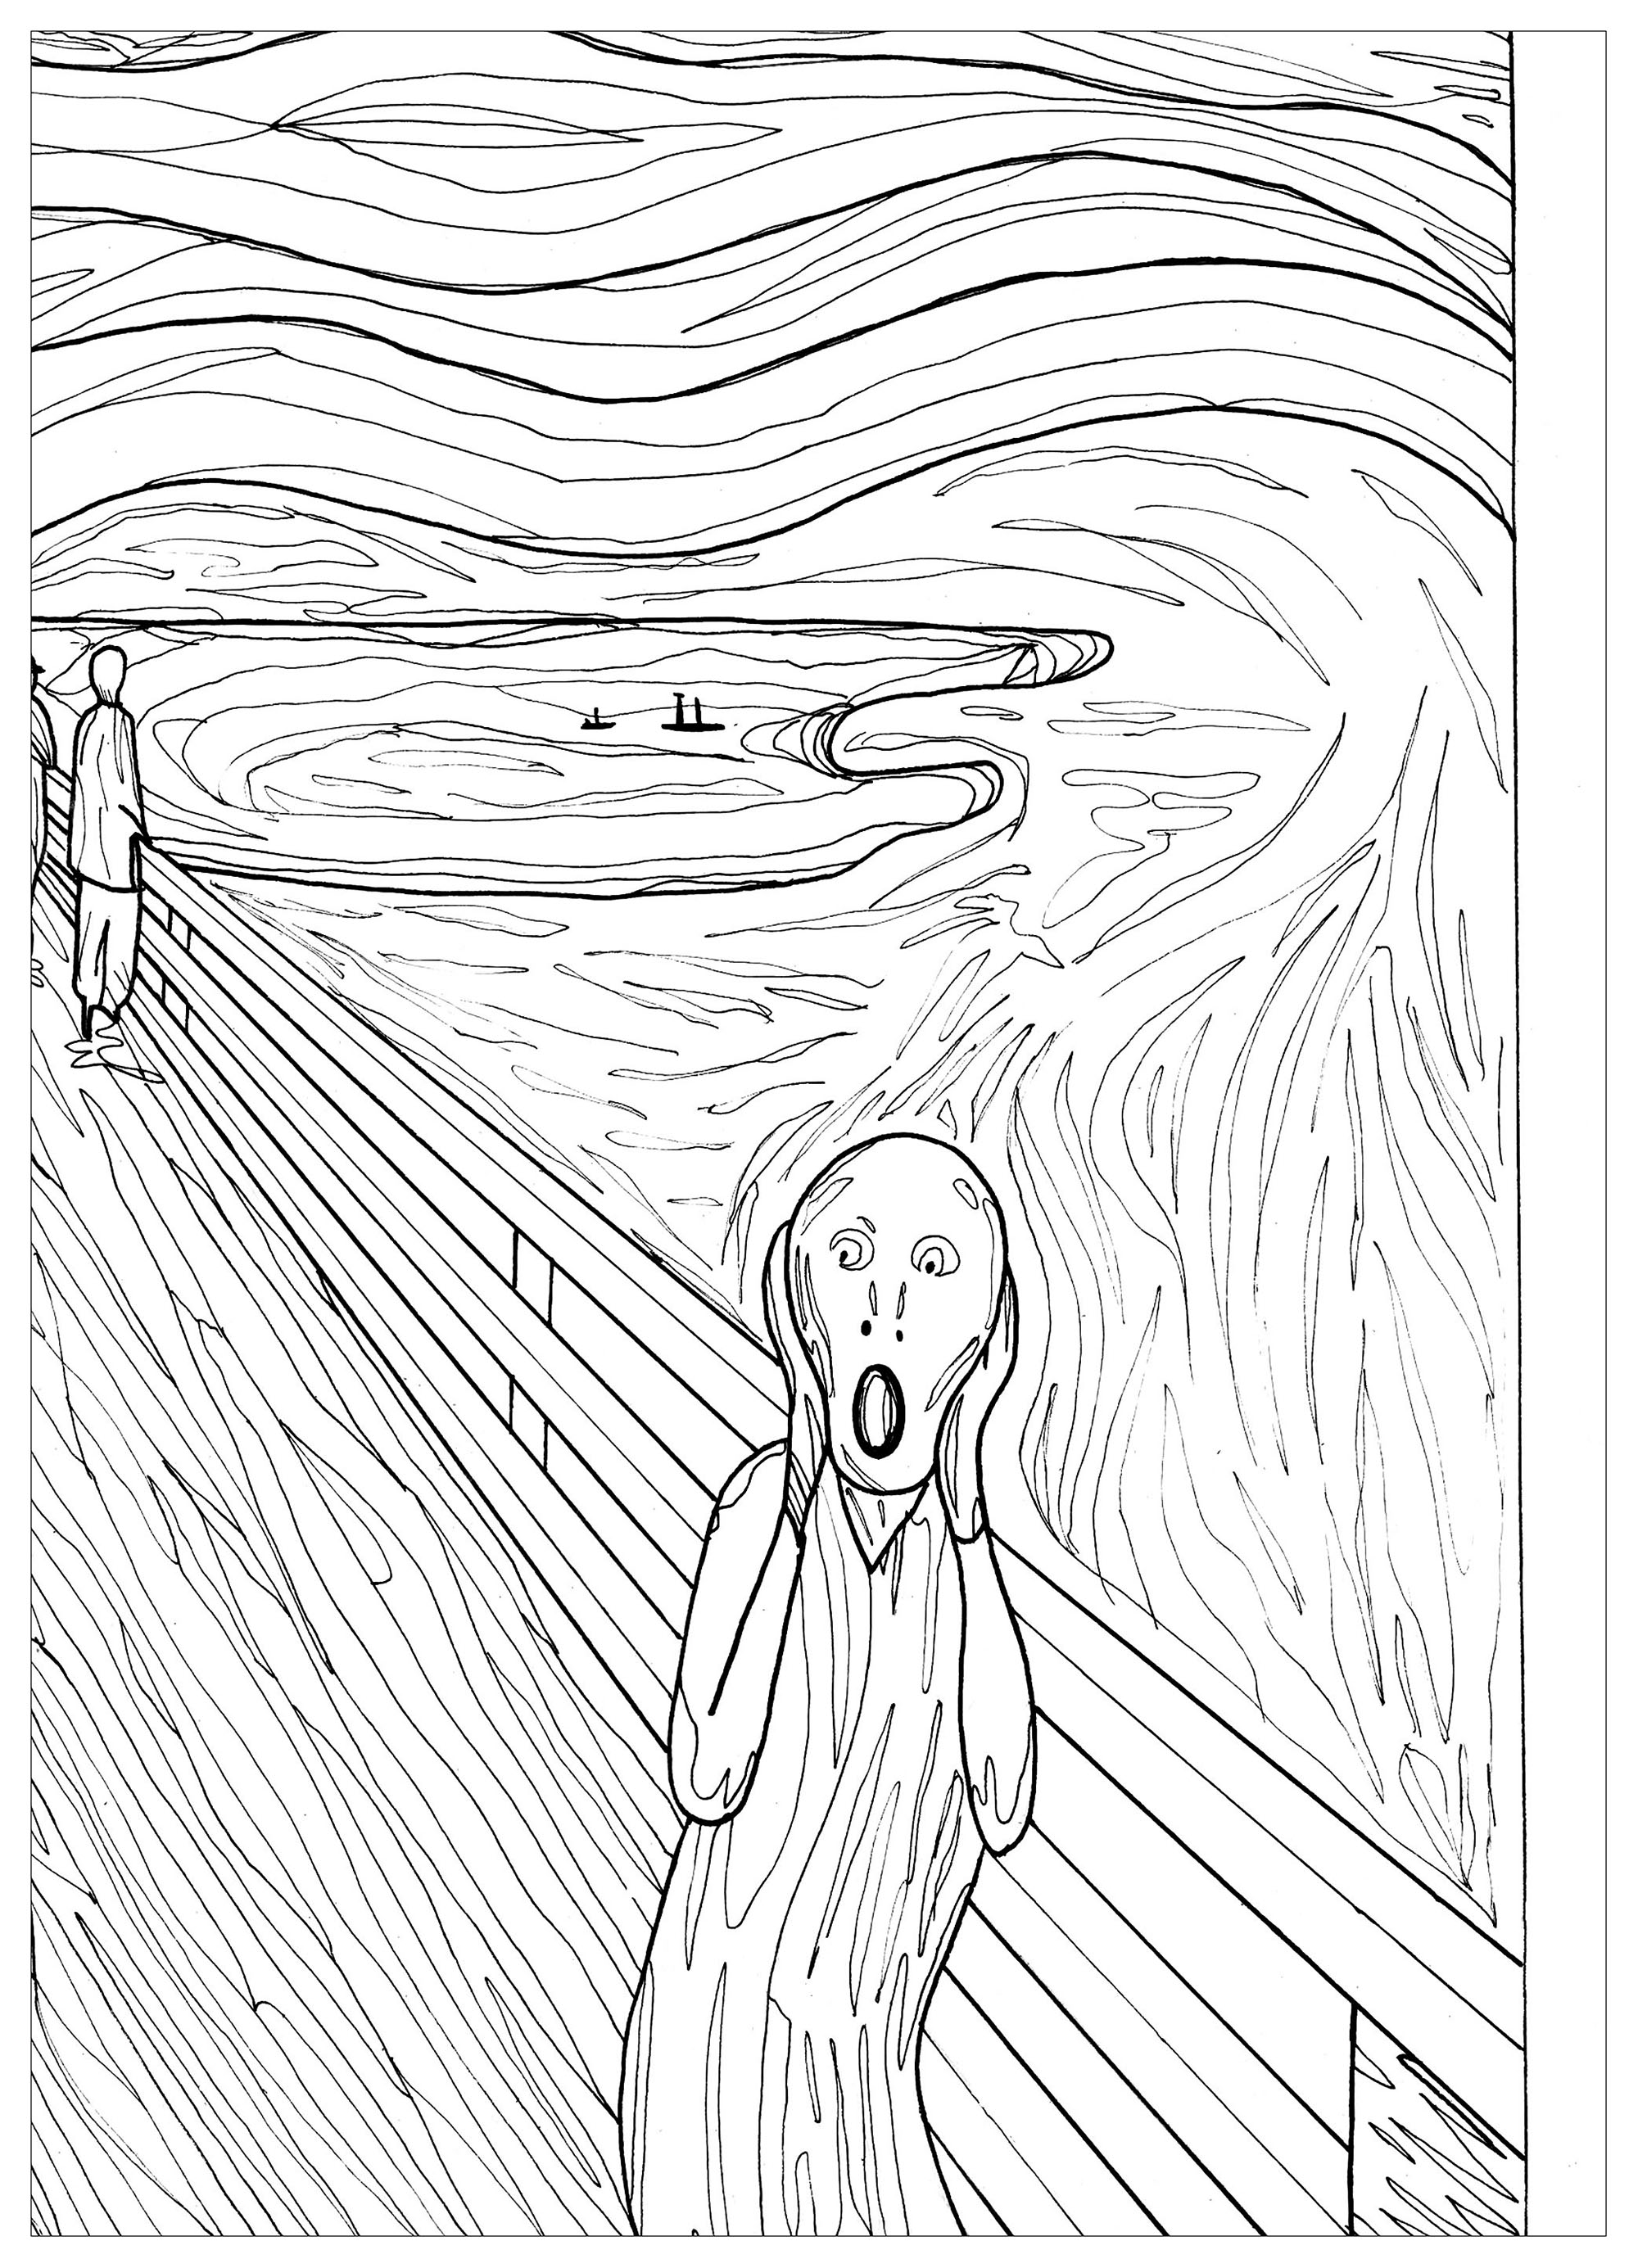 'The Scream' by Edvard Munch will give you shivers !. Did you know ? Director Wes Craven was inspired by Munch’s The Scream when he conceptualized the idea for the haunting mask which appears throughout his 1996 scary movie Scream, starring Drew Barrymore, Courtney Cox and Neve Campbell.